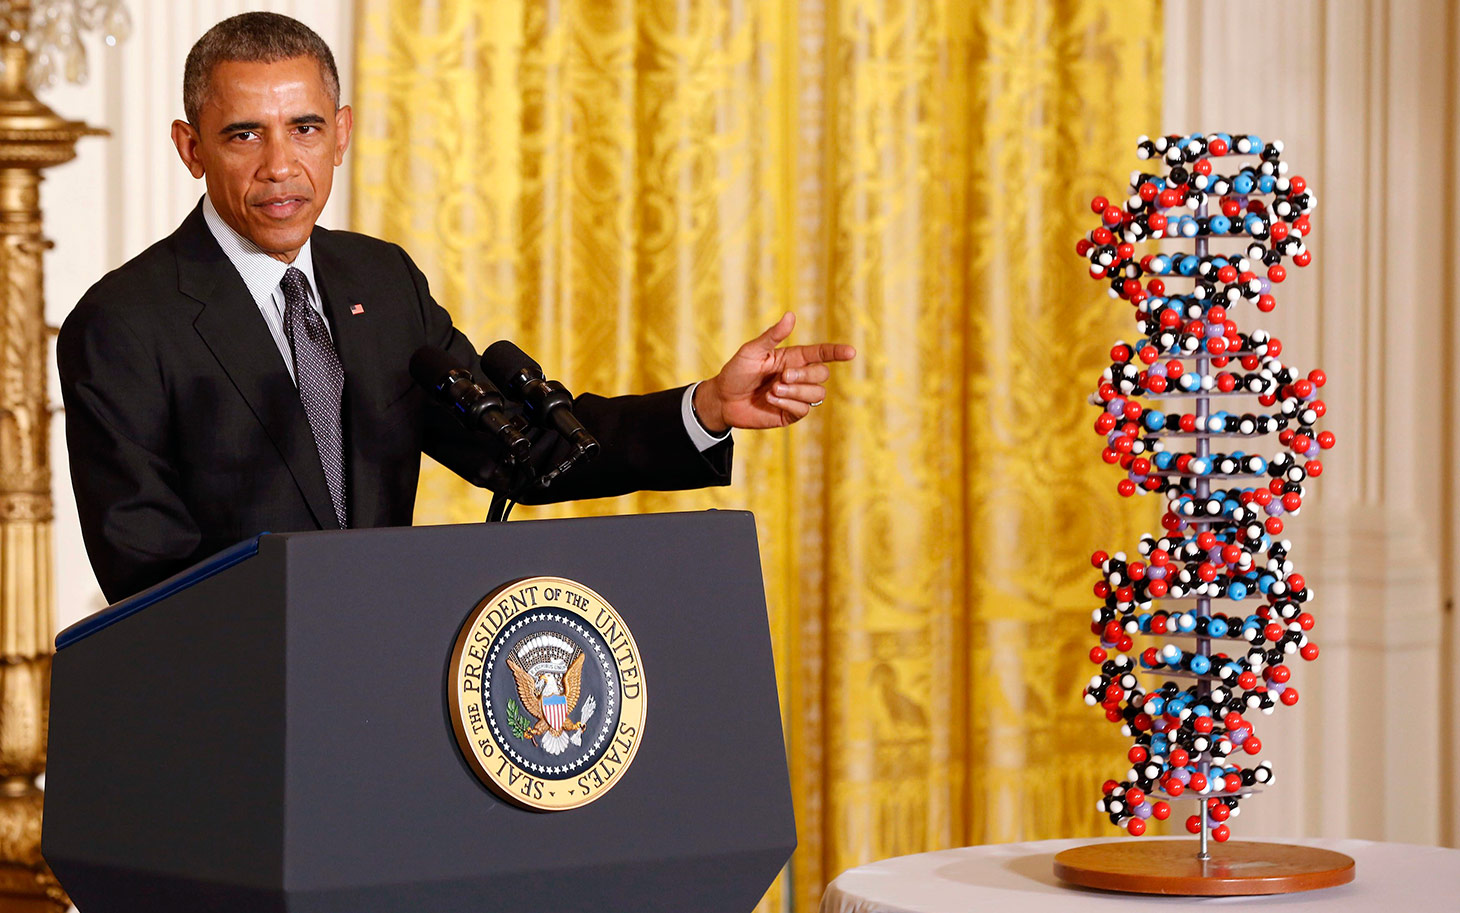 Obama makes remarks highlighting investments to improve health and treat disease through precision medicine while in the East Room of the White House in Washington